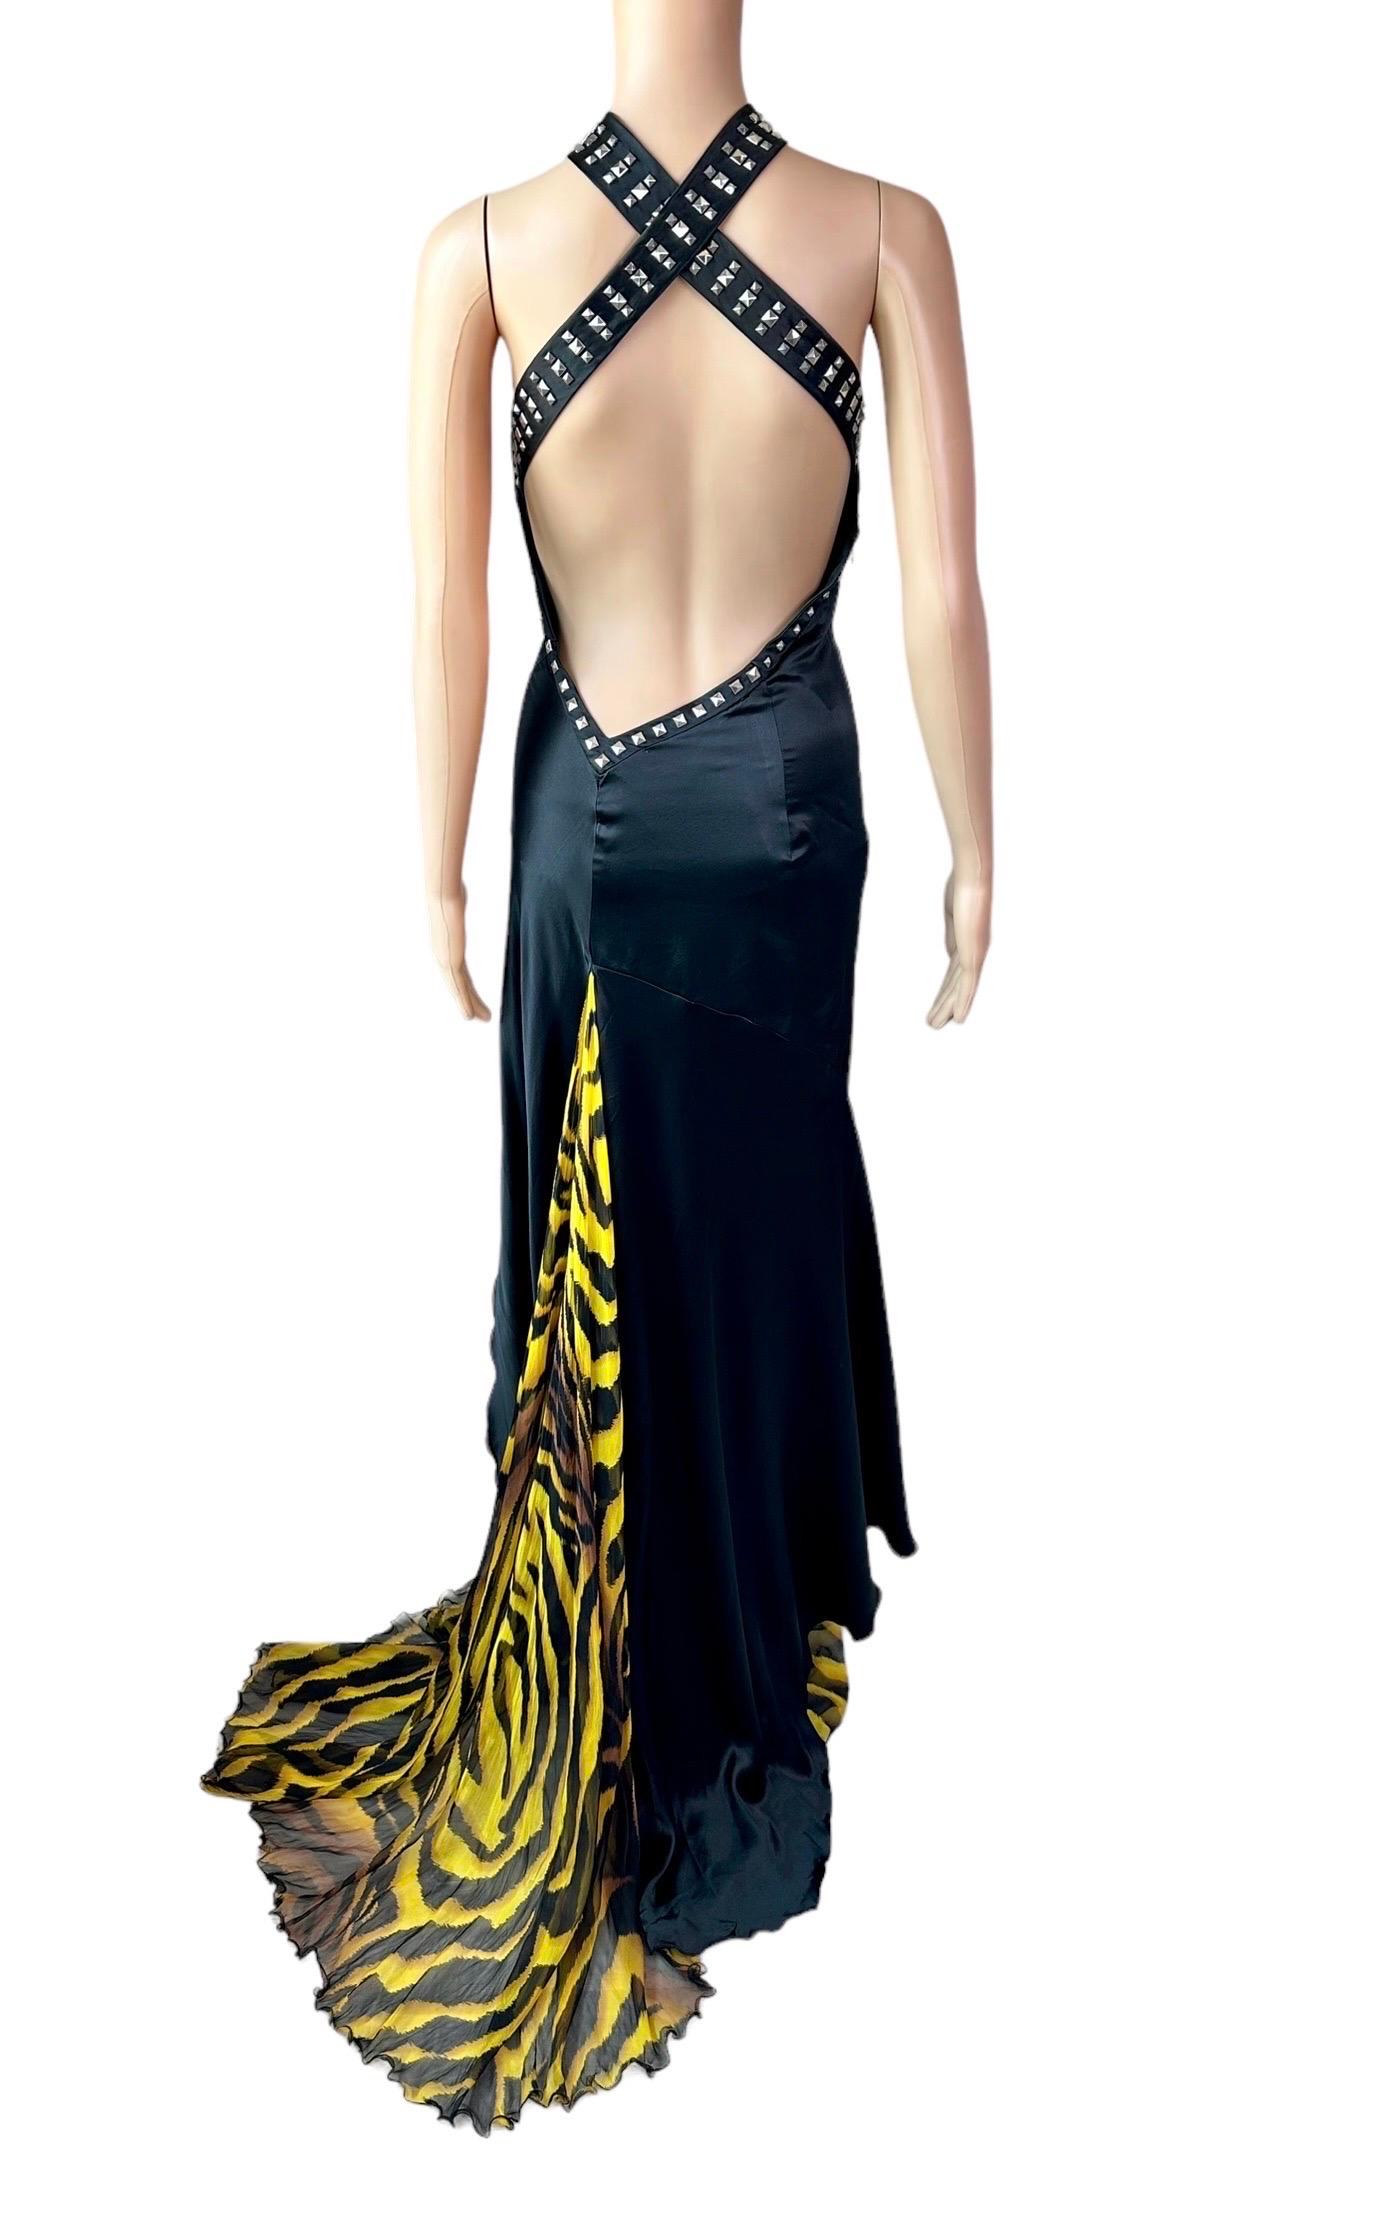 Versace F/W 2004 Runway Studded Plunging Keyhole Neckline Evening Dress Gown For Sale 4